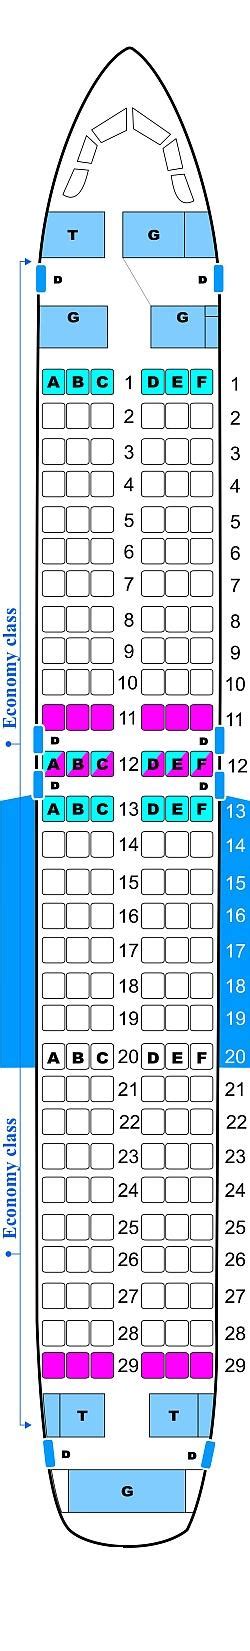 airbus  aircraft seat maps specs  amenities images